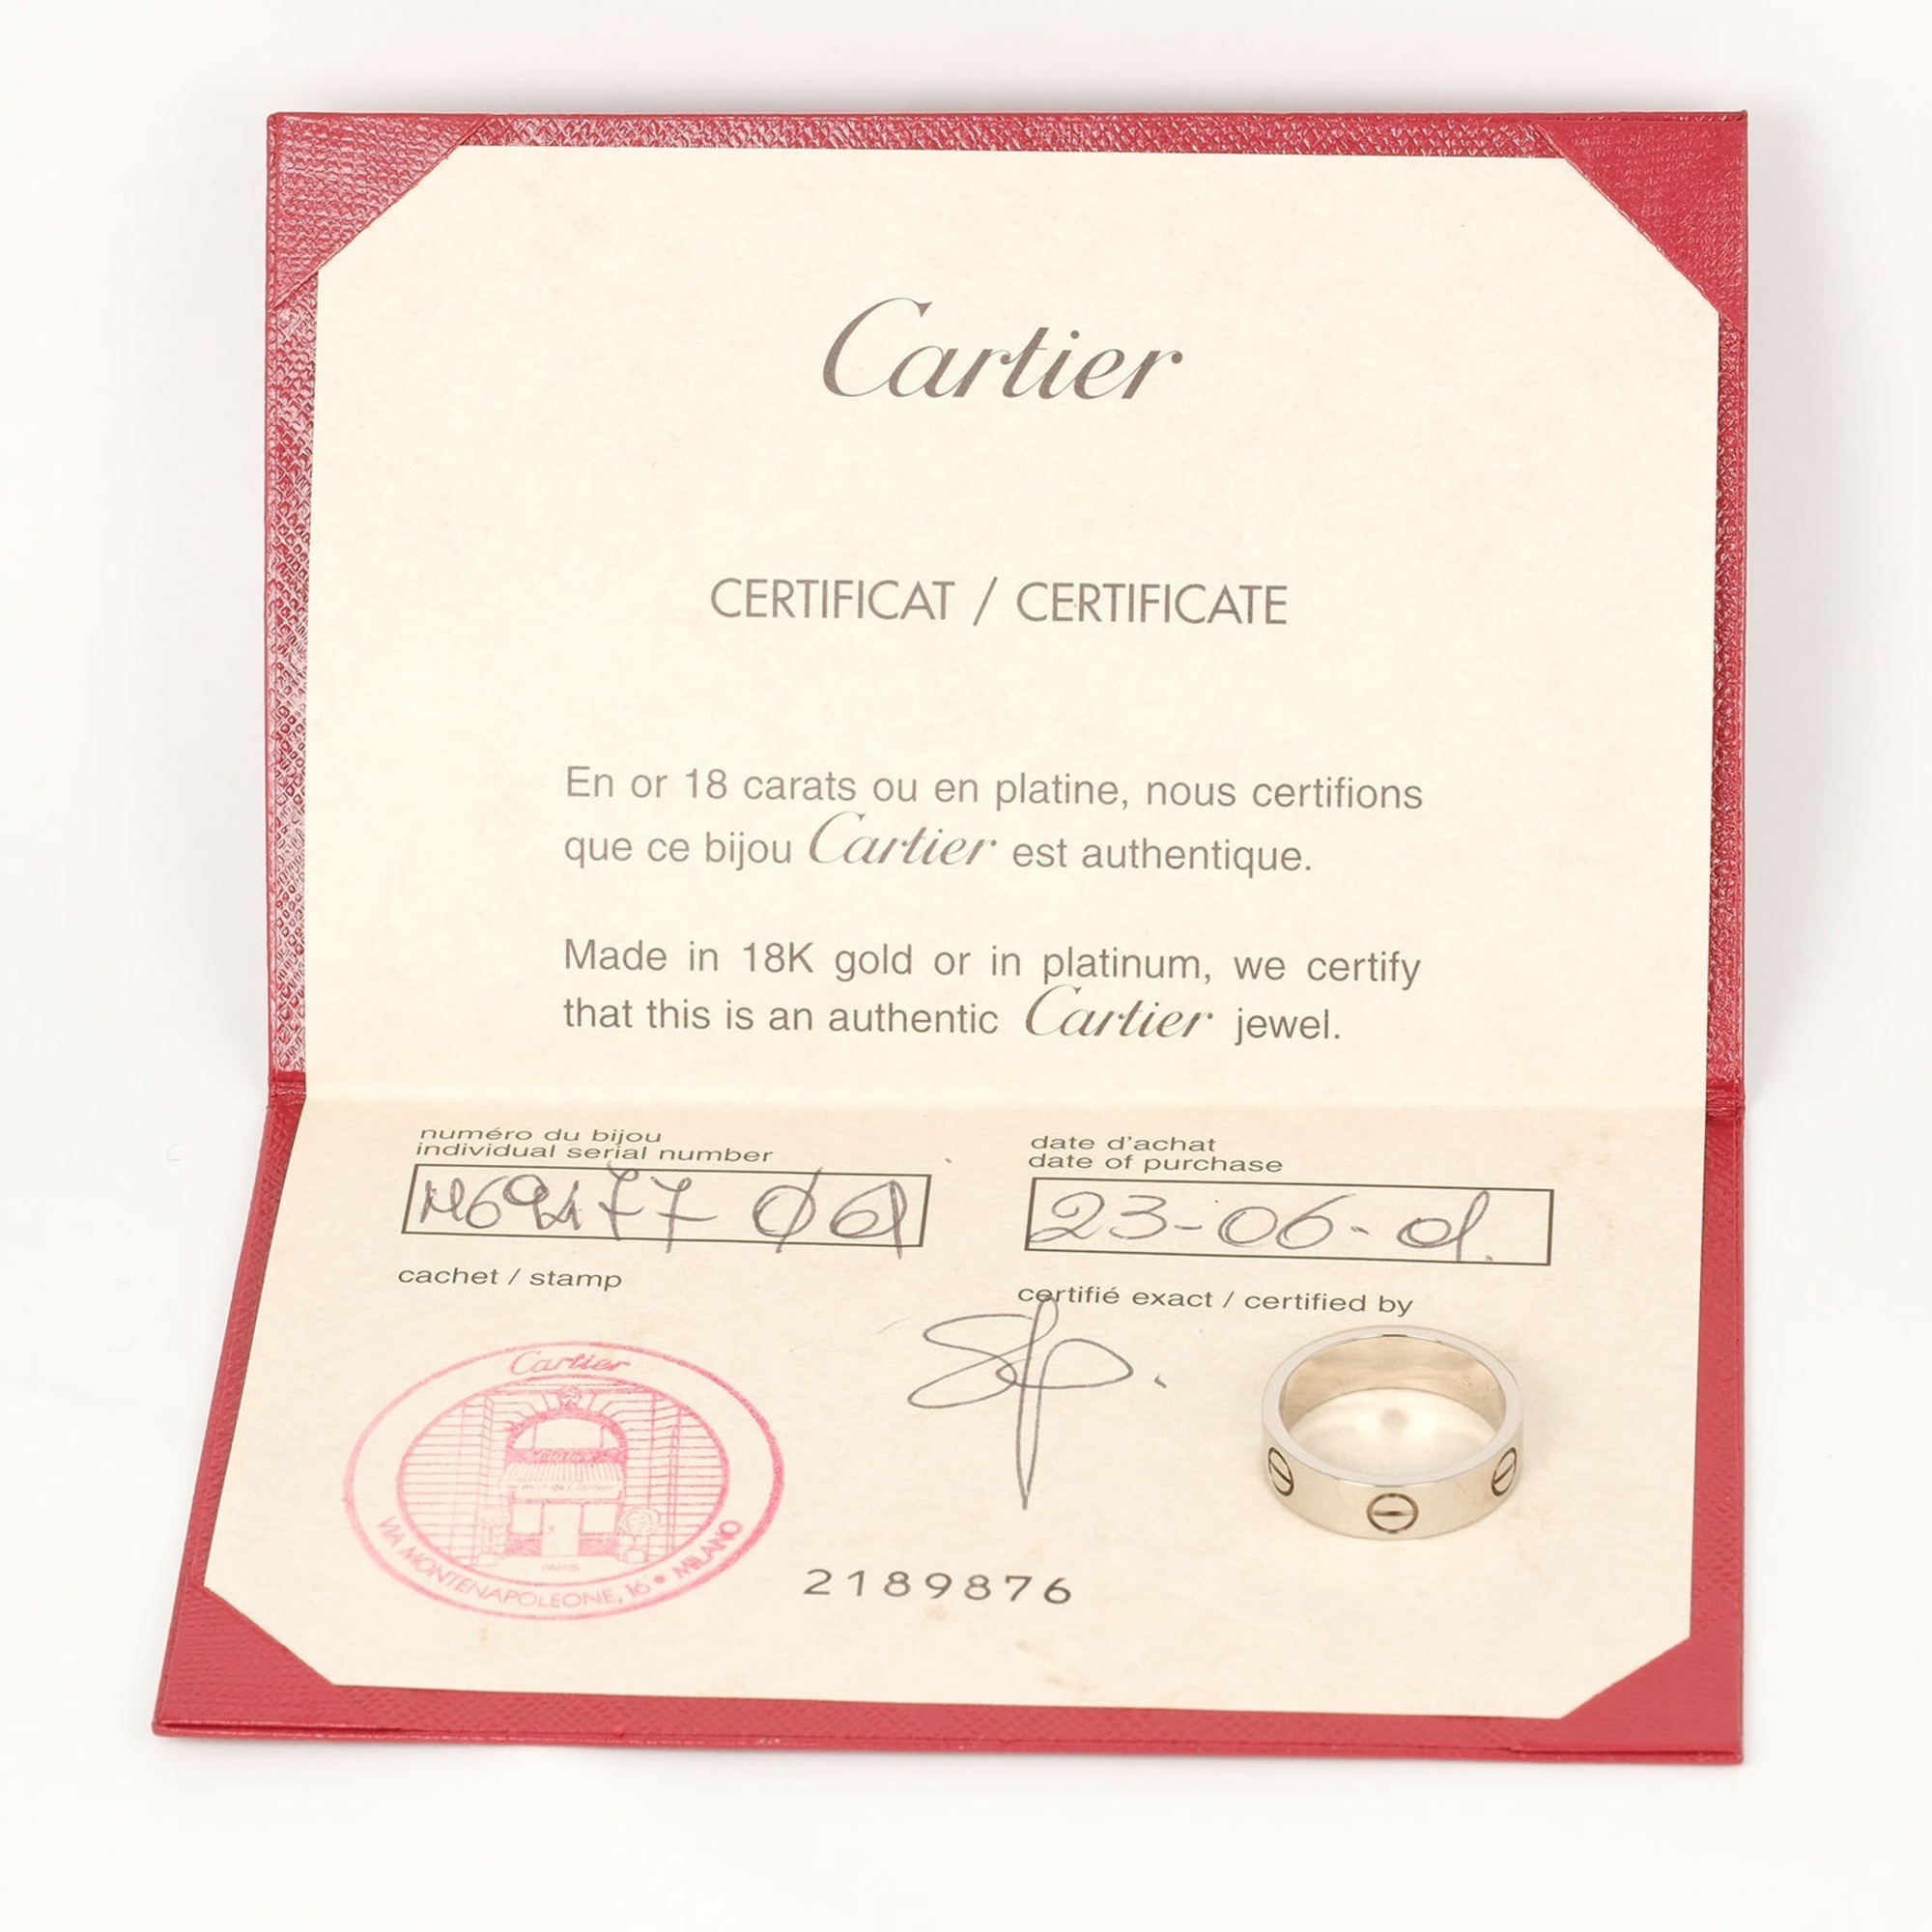 Cartier Love size 20 ring, K18 WG white gold, approx. 9.34g I122924021